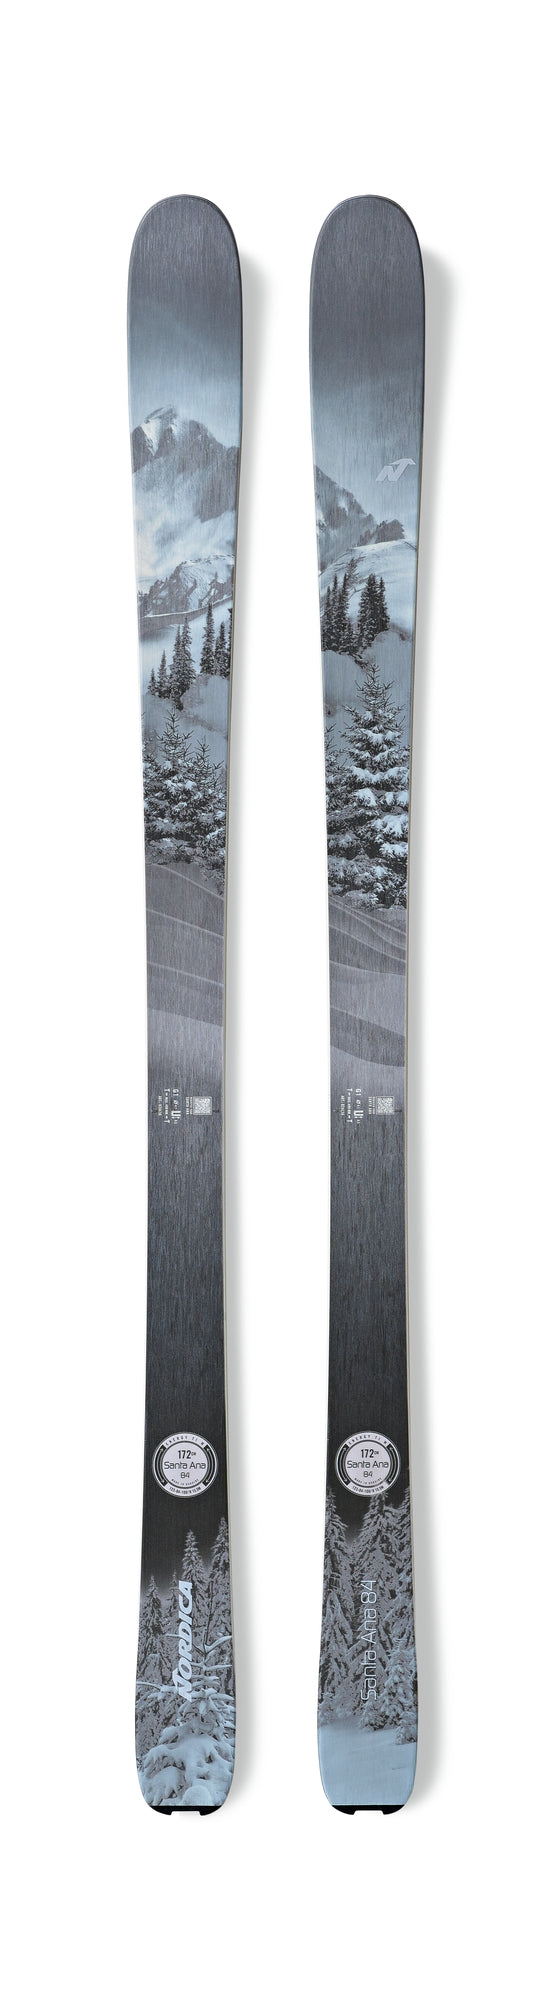 This is an image of Nordica Santa Ana 84 Skis